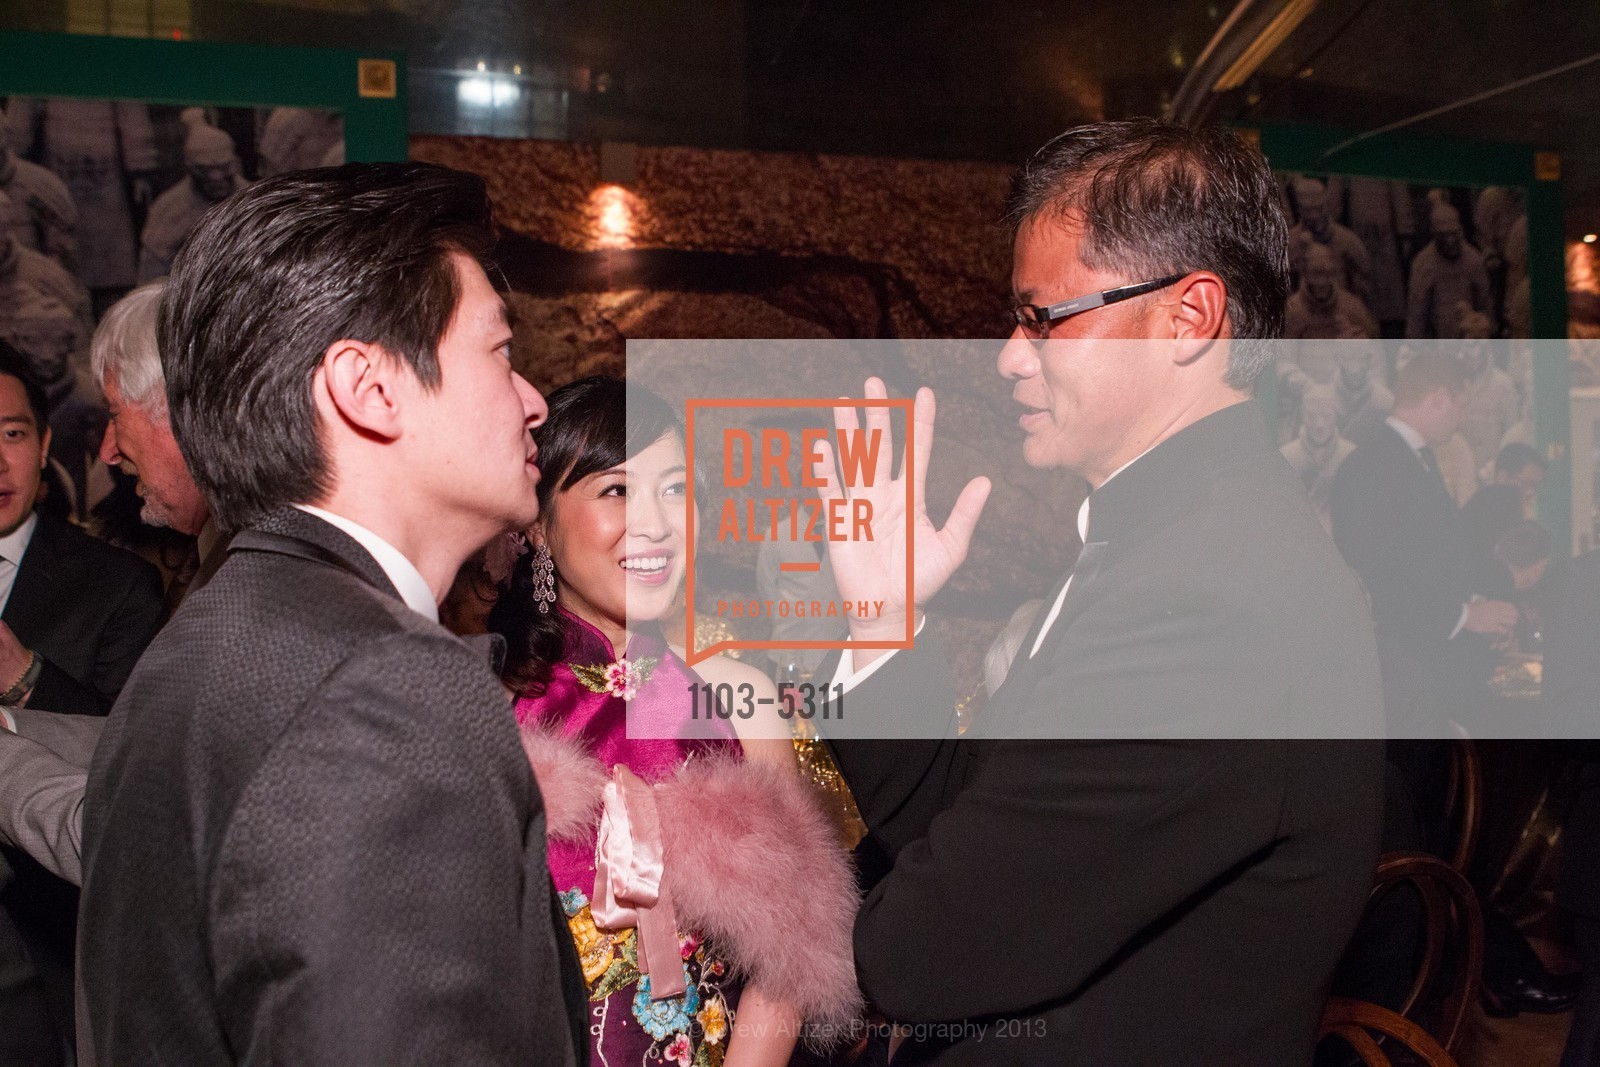 Andrew Chung, Coral Chung, Jerry Yang, Photo #1103-5311